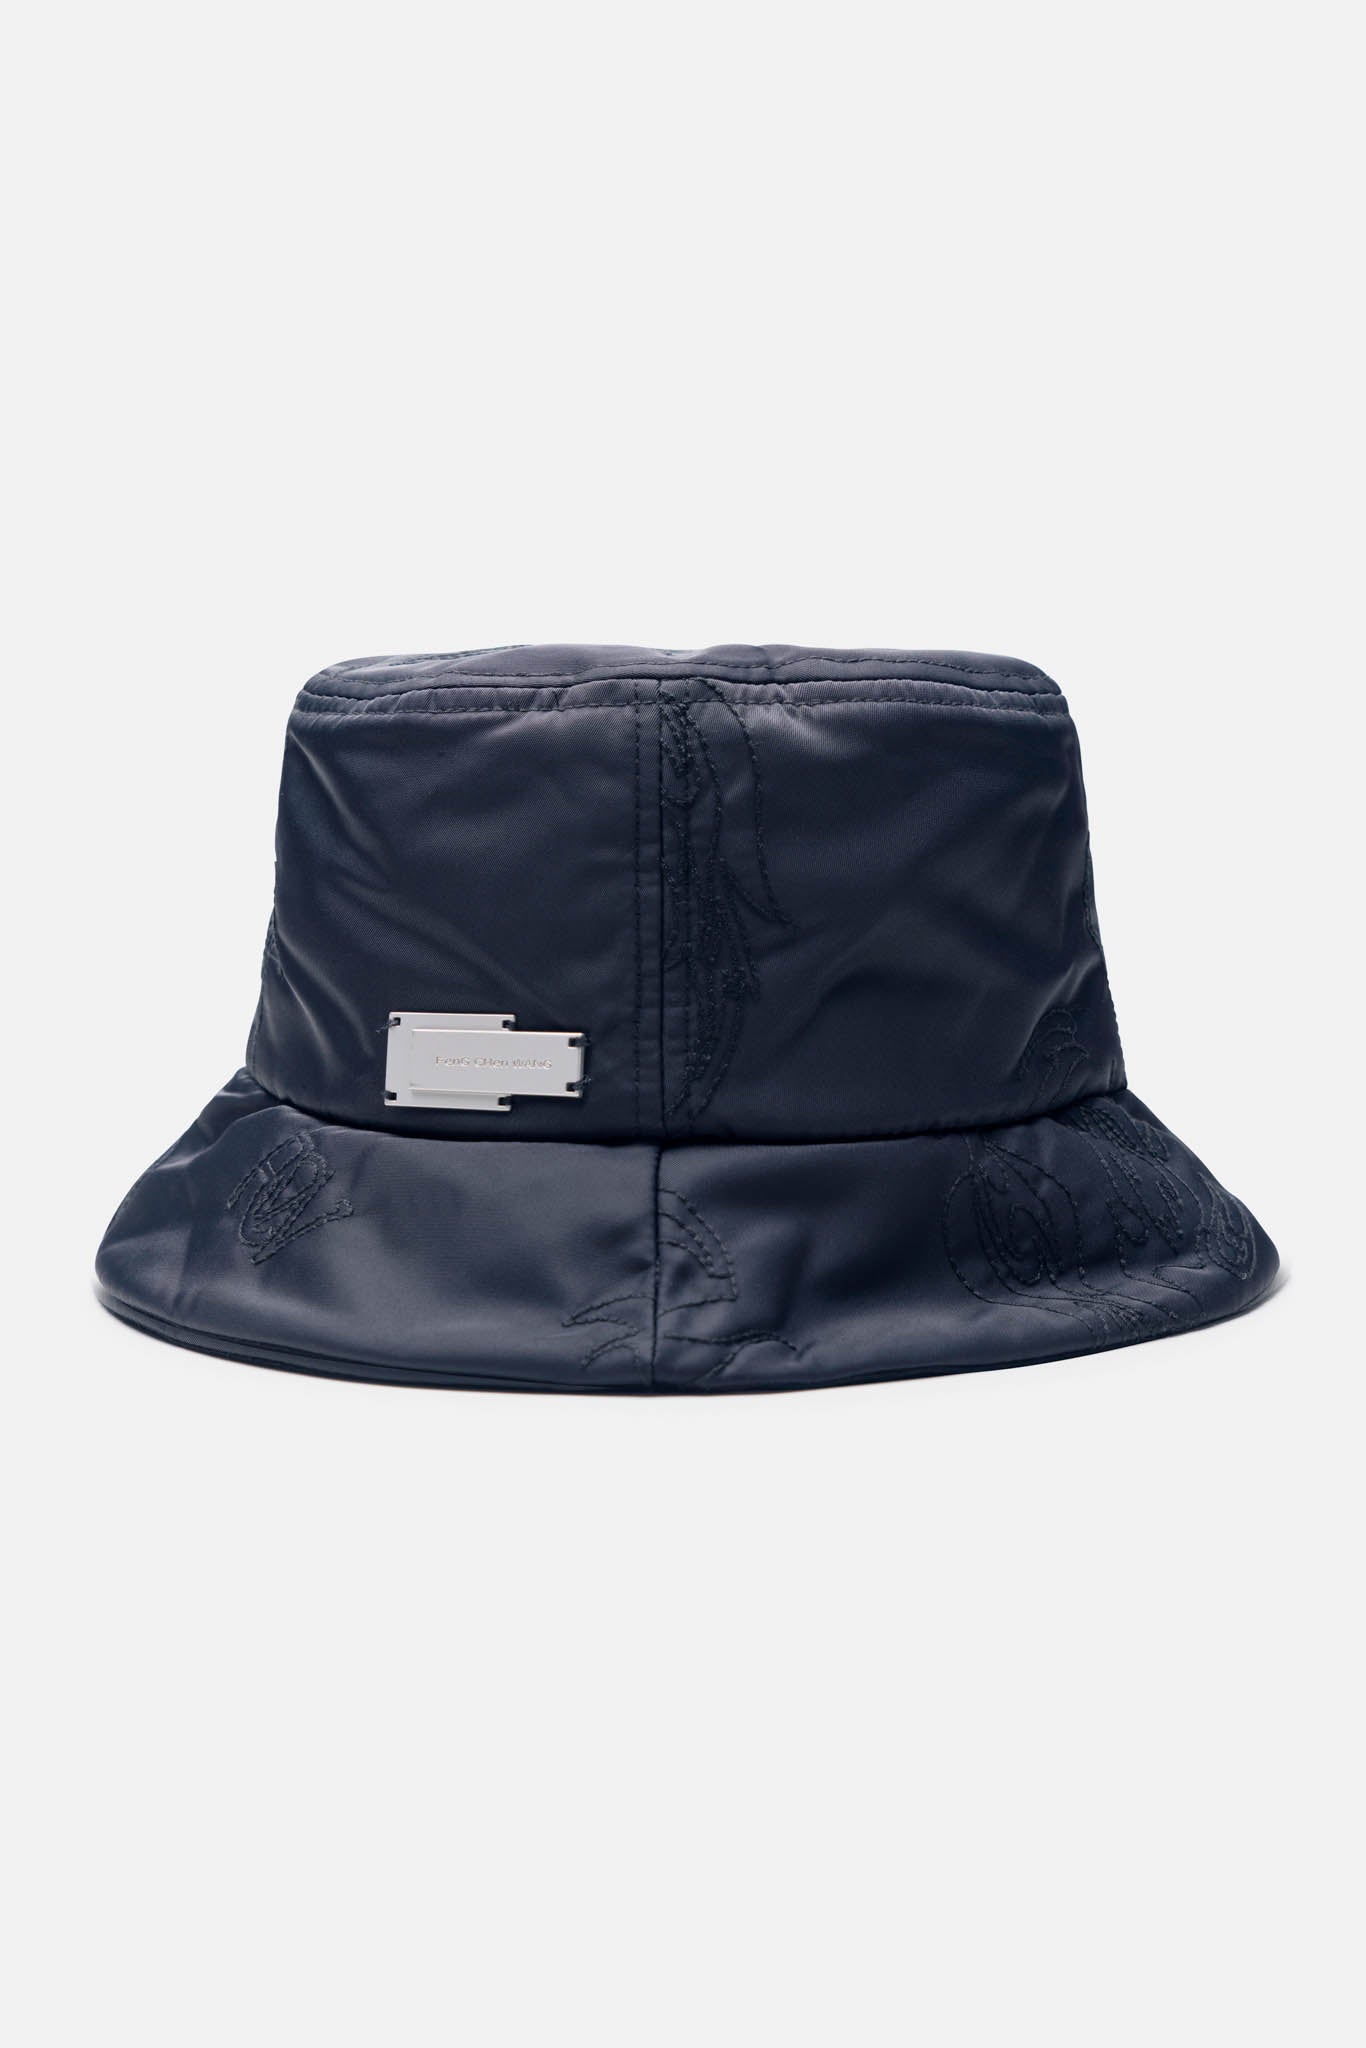 Selectshop FRAME - FENG CHEN WANG Quilted Bucket Hat All-Accessories Dubai